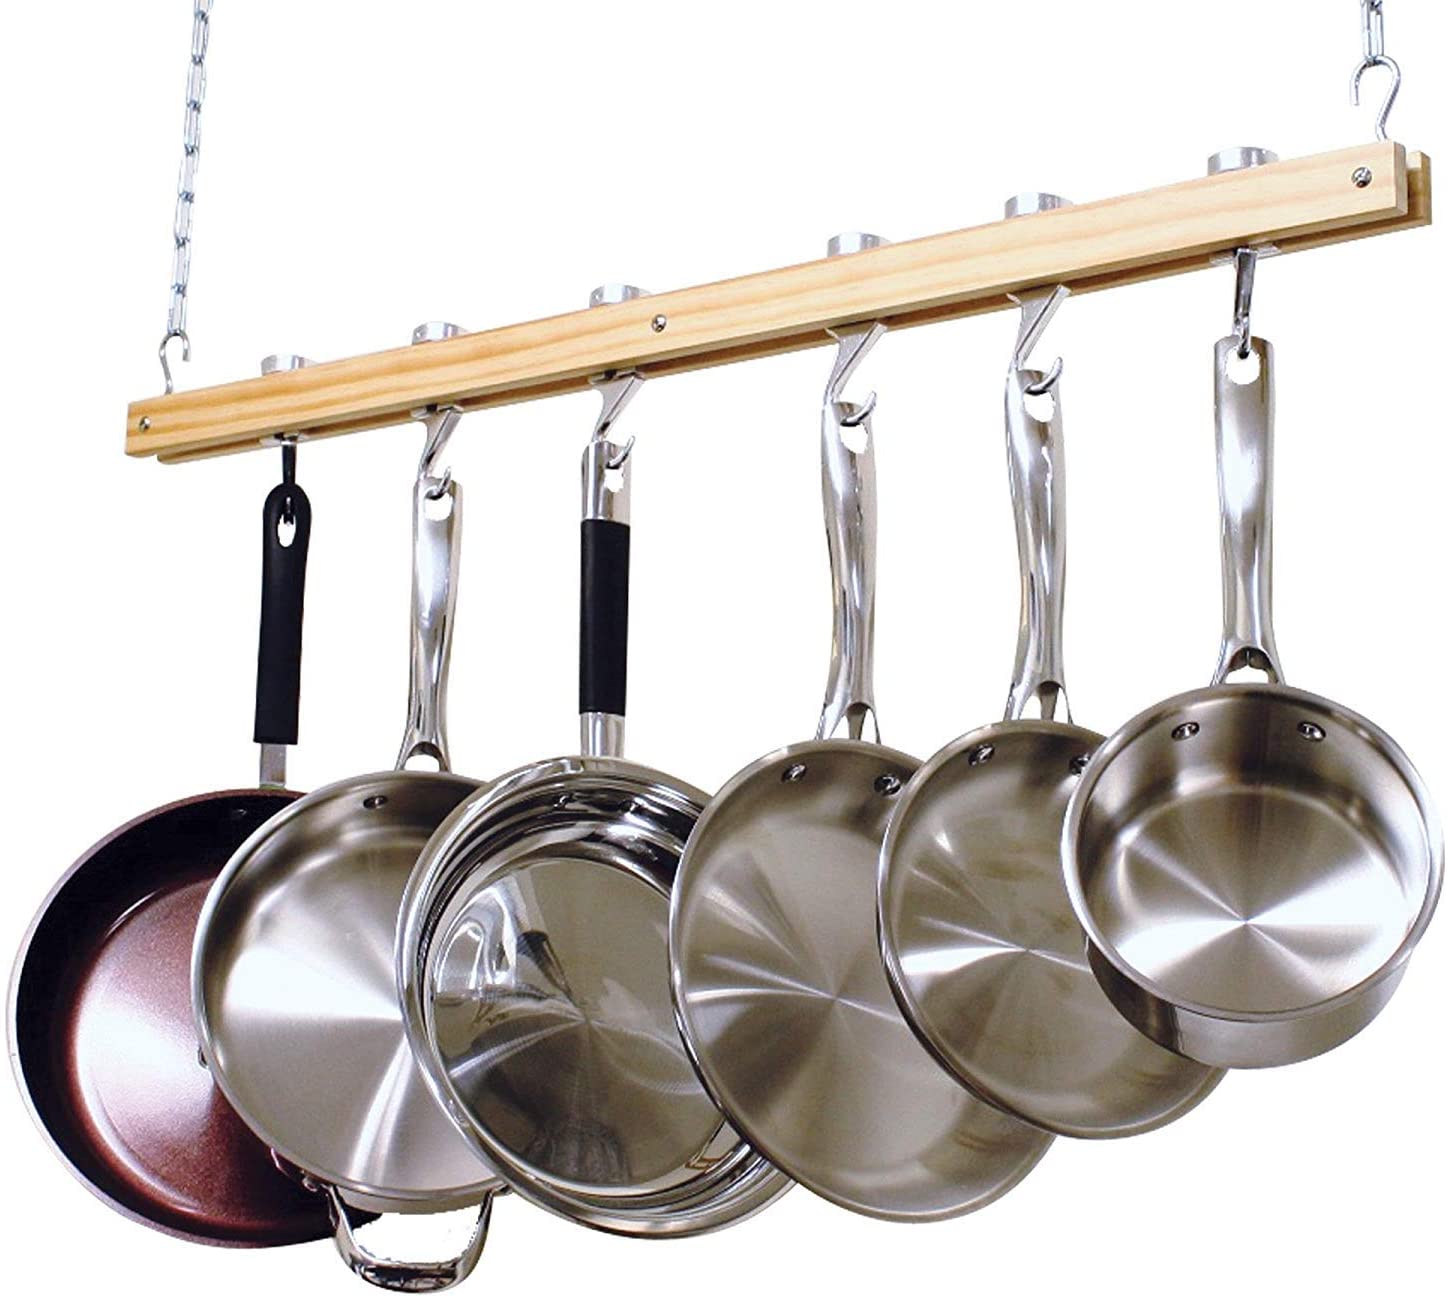 Space-savers for small apartments: Hanging pot racks will save tons of space in your small kitchen